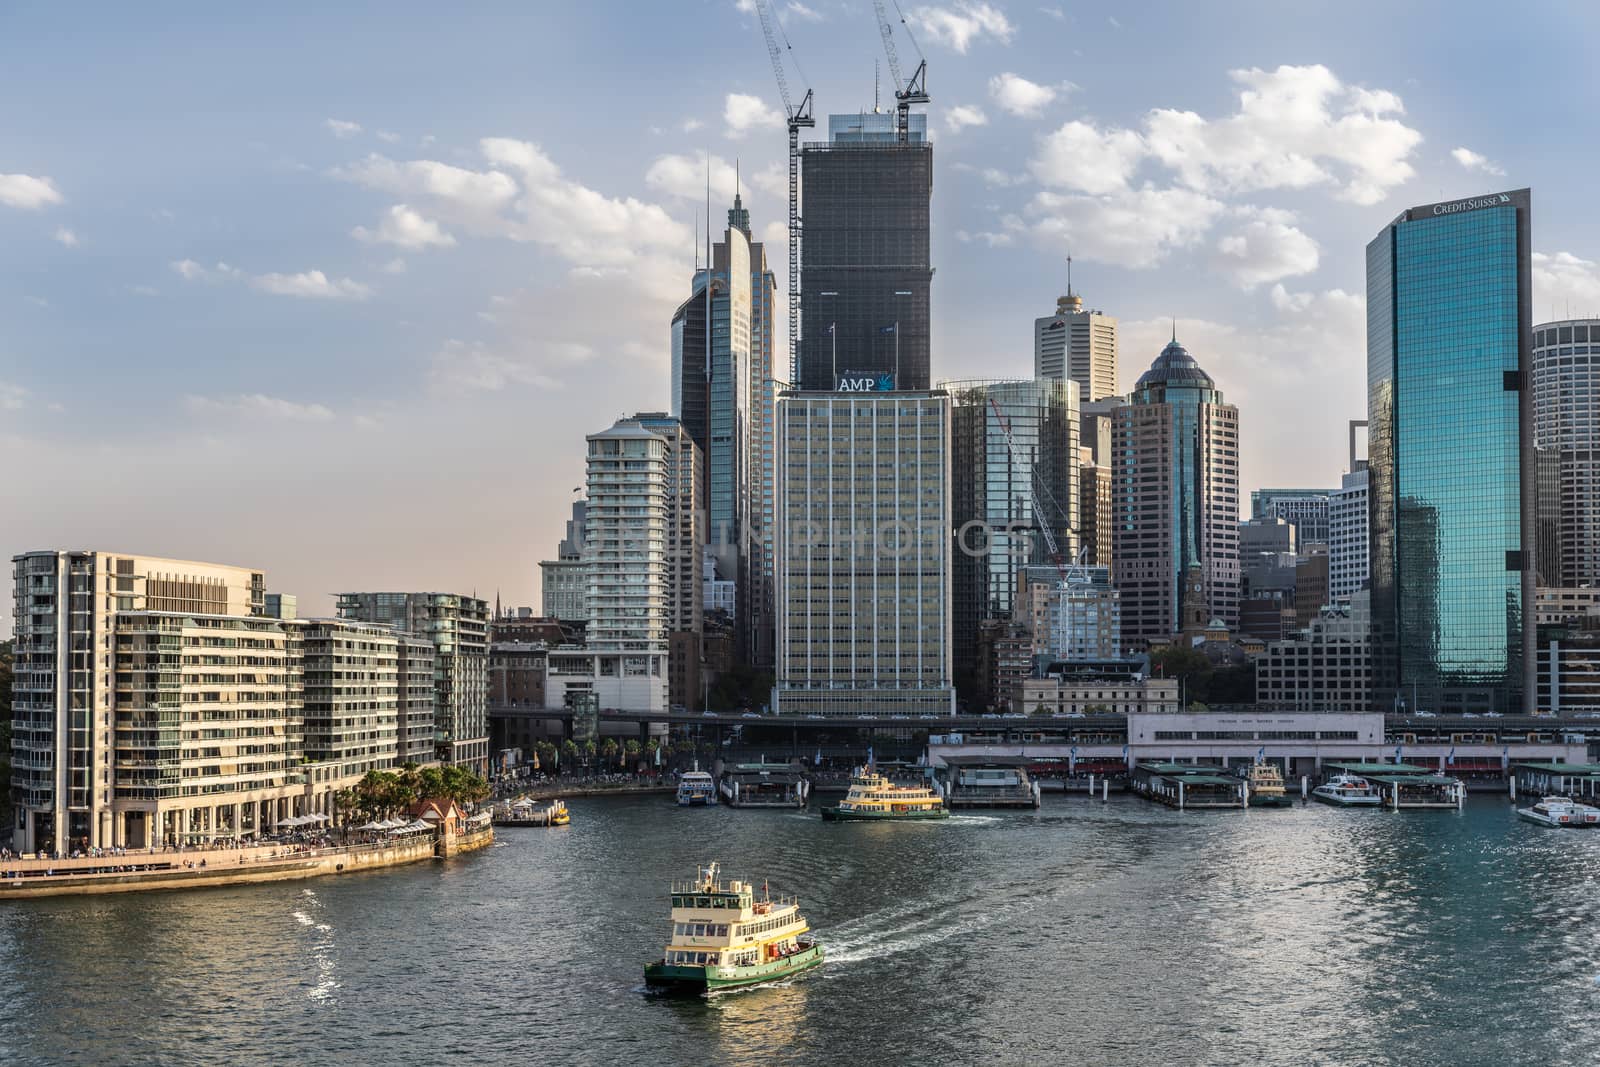 Sydney, Australia - February 12, 2019: Eastern side of Ferry terminal and Circular Quay Railway Station plus skyline in back. Highrises under construction with cranes. Evening shot with light blue sky.